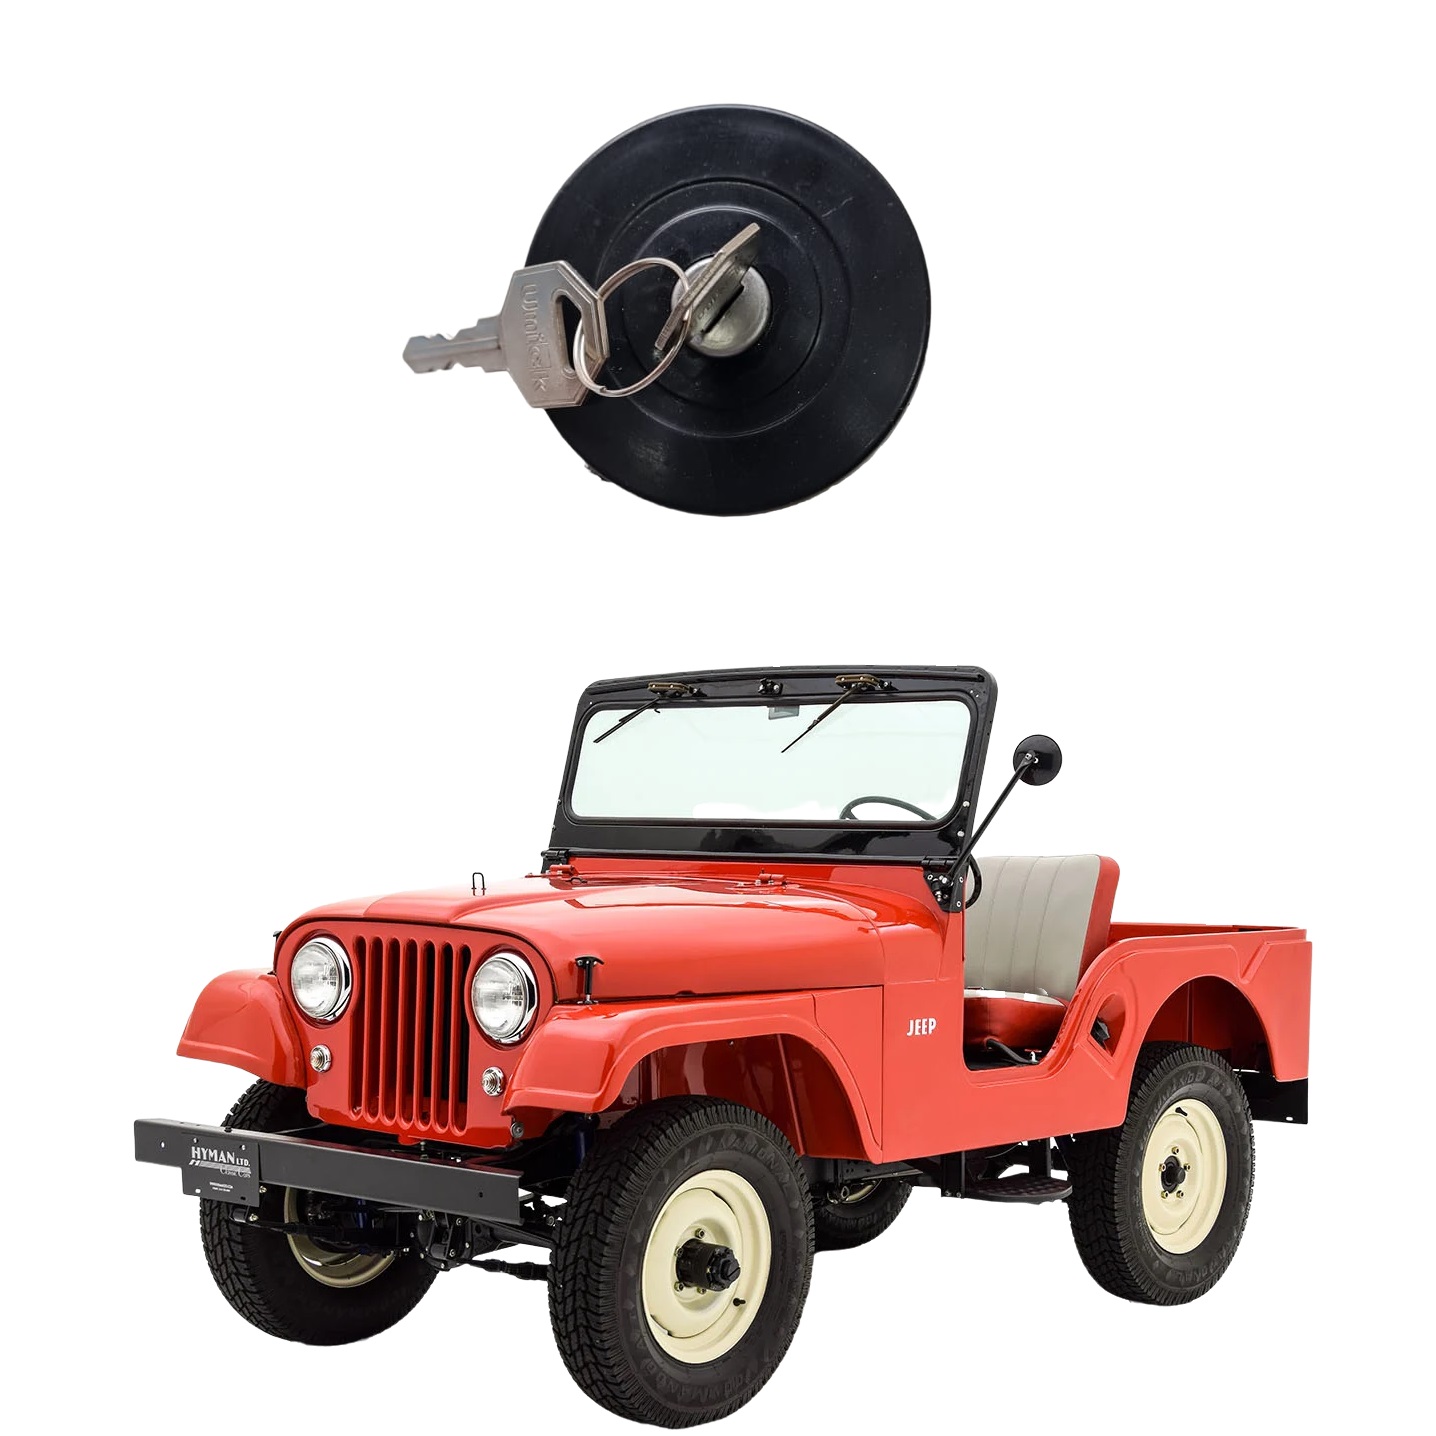 Tampa Do Tanque Jeep CJ5 / Rural / F 75 Ford Willys 66/83